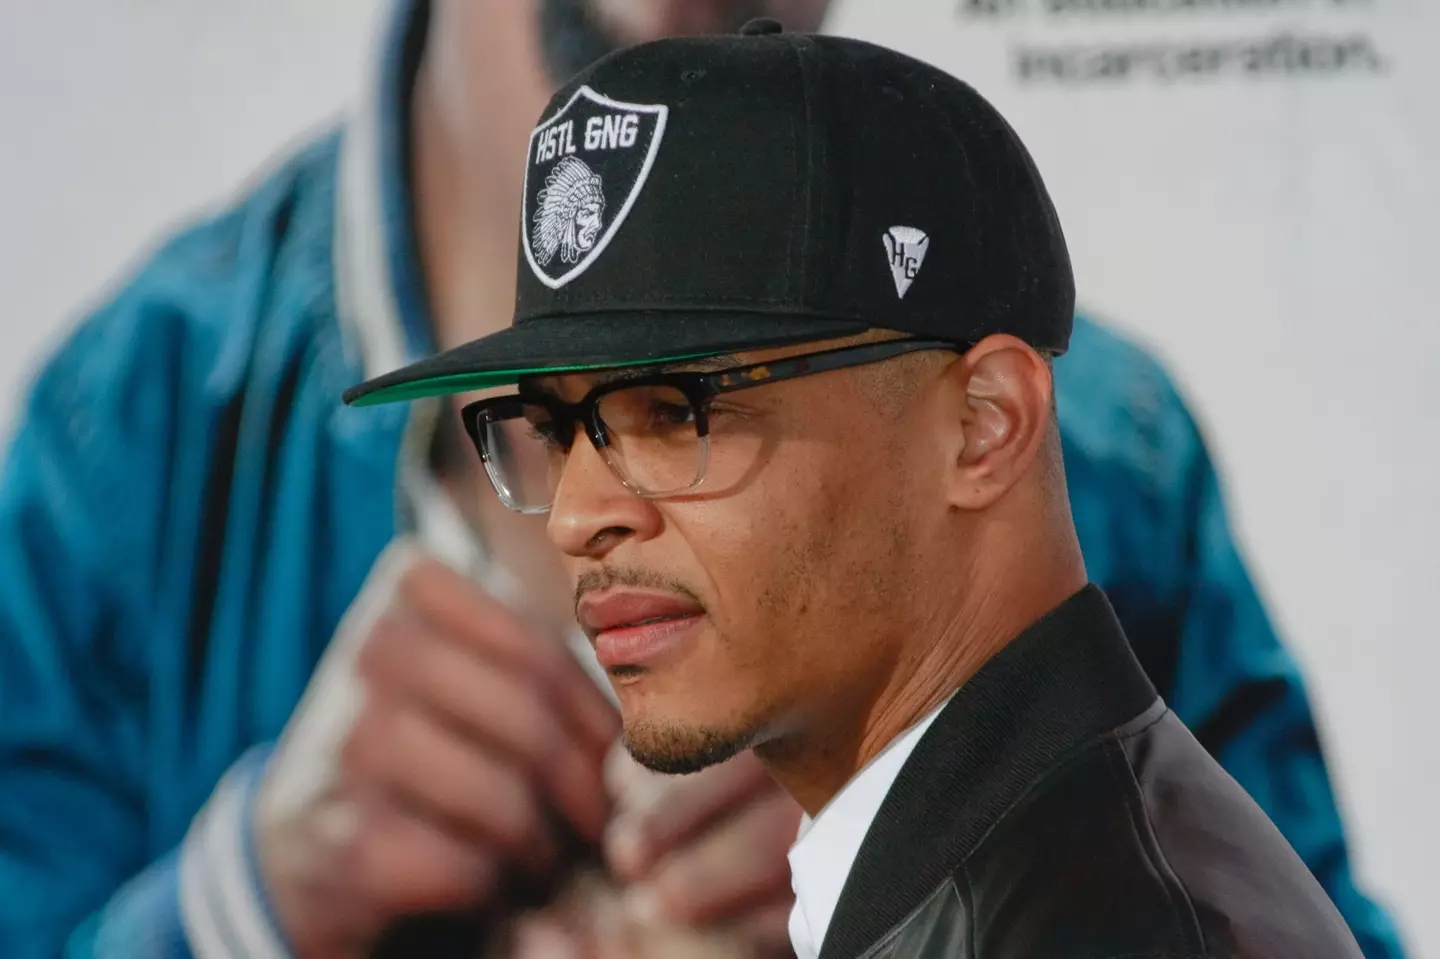 Rapper T.I. (real name Clifford Joseph Harris) said he used to take his daughter to the gynaecologist when she was a teenager.